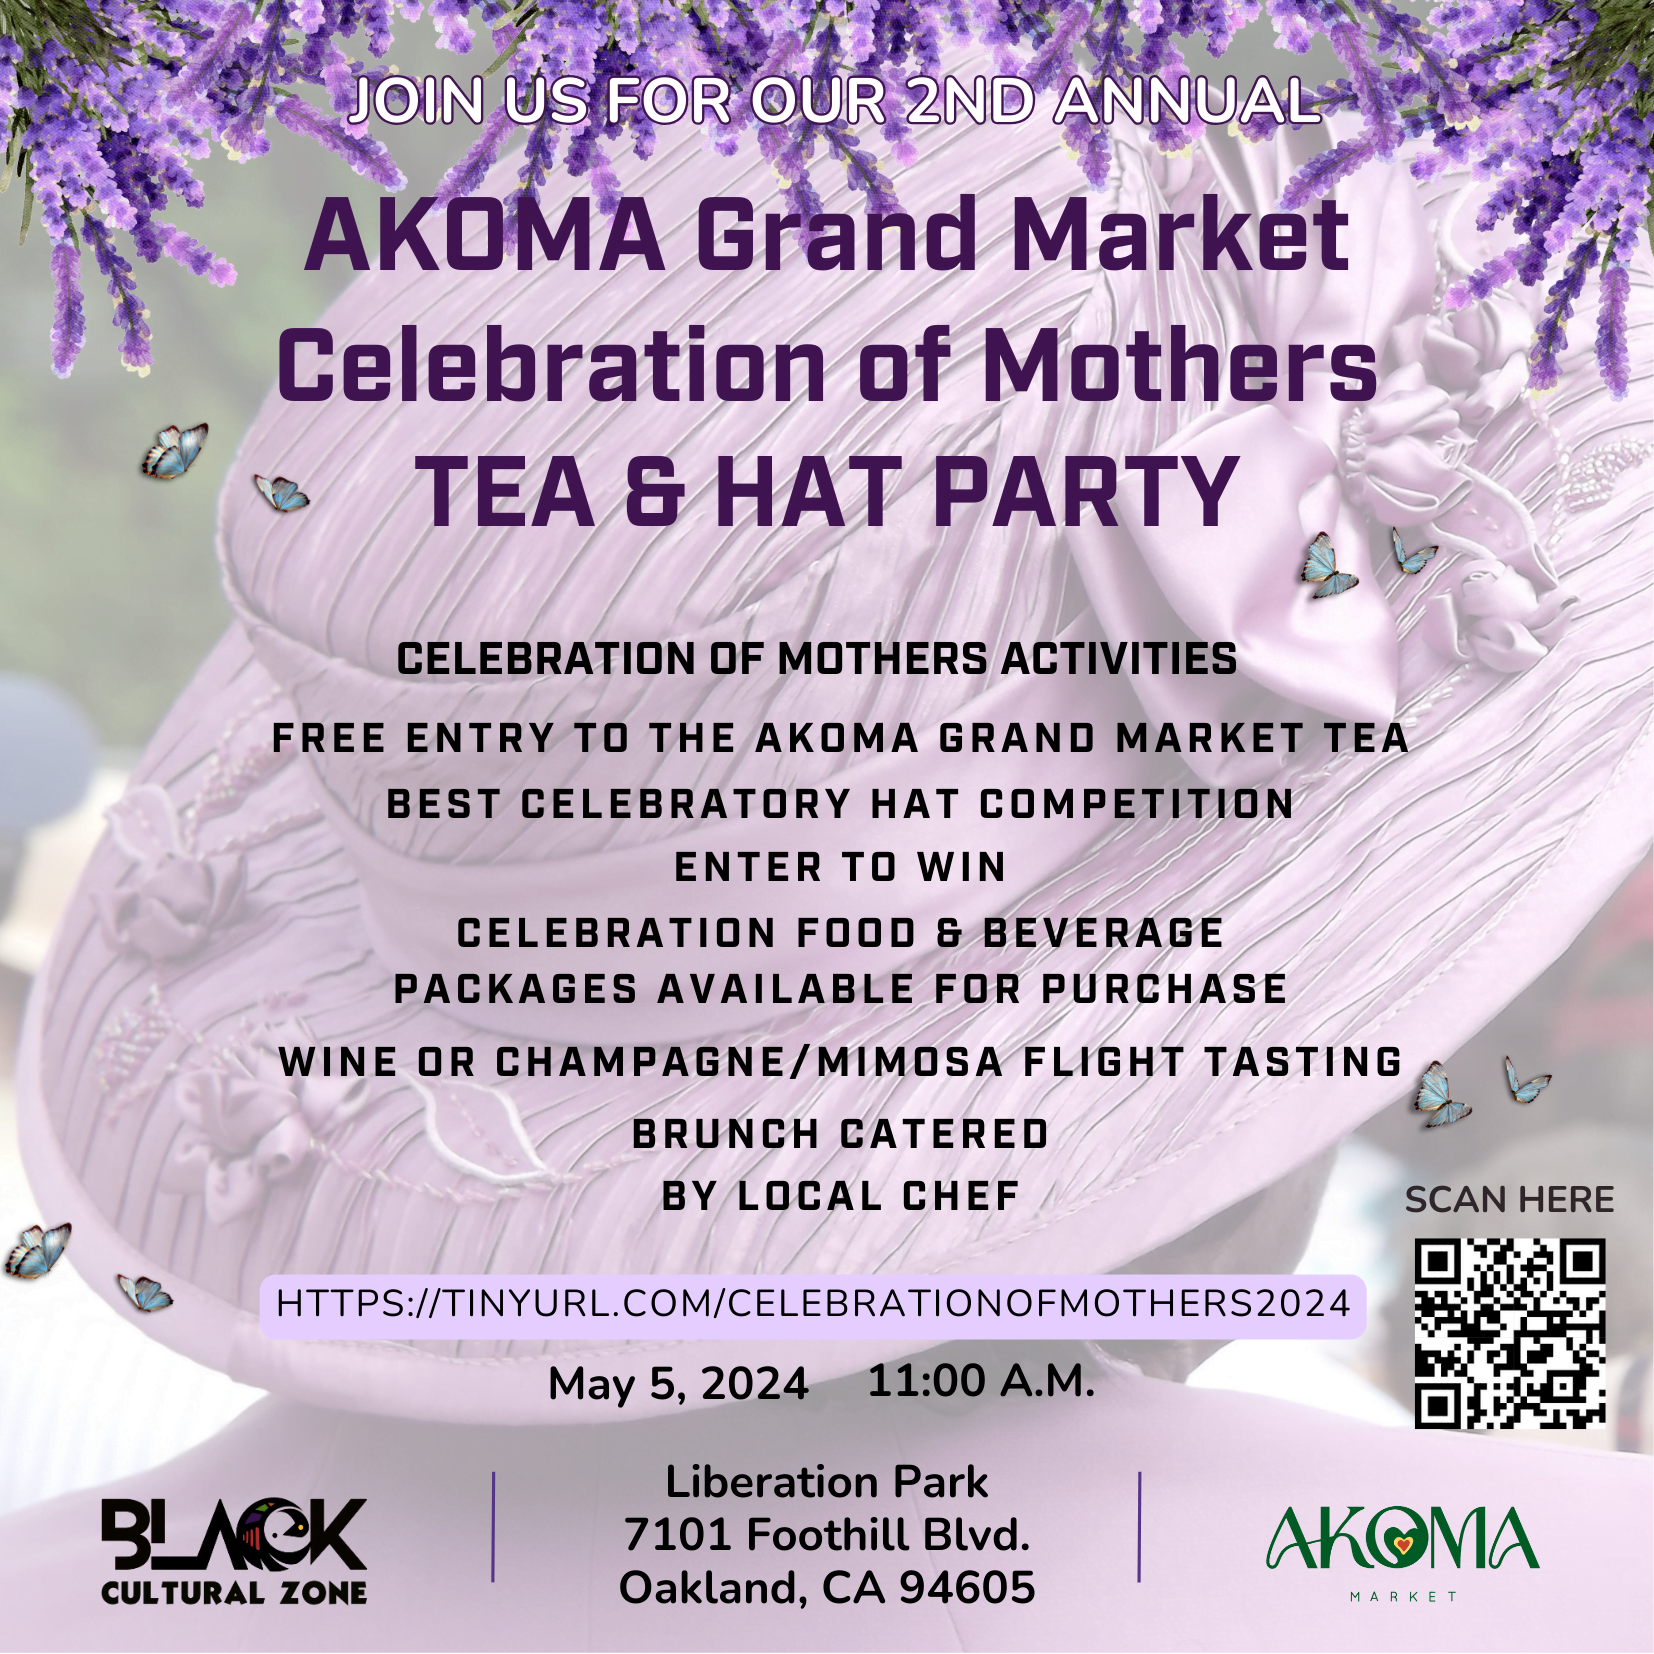 2nd-Annual-AKOMA-Grand-Market-Tea-Party-May-5th-2024-Image.png